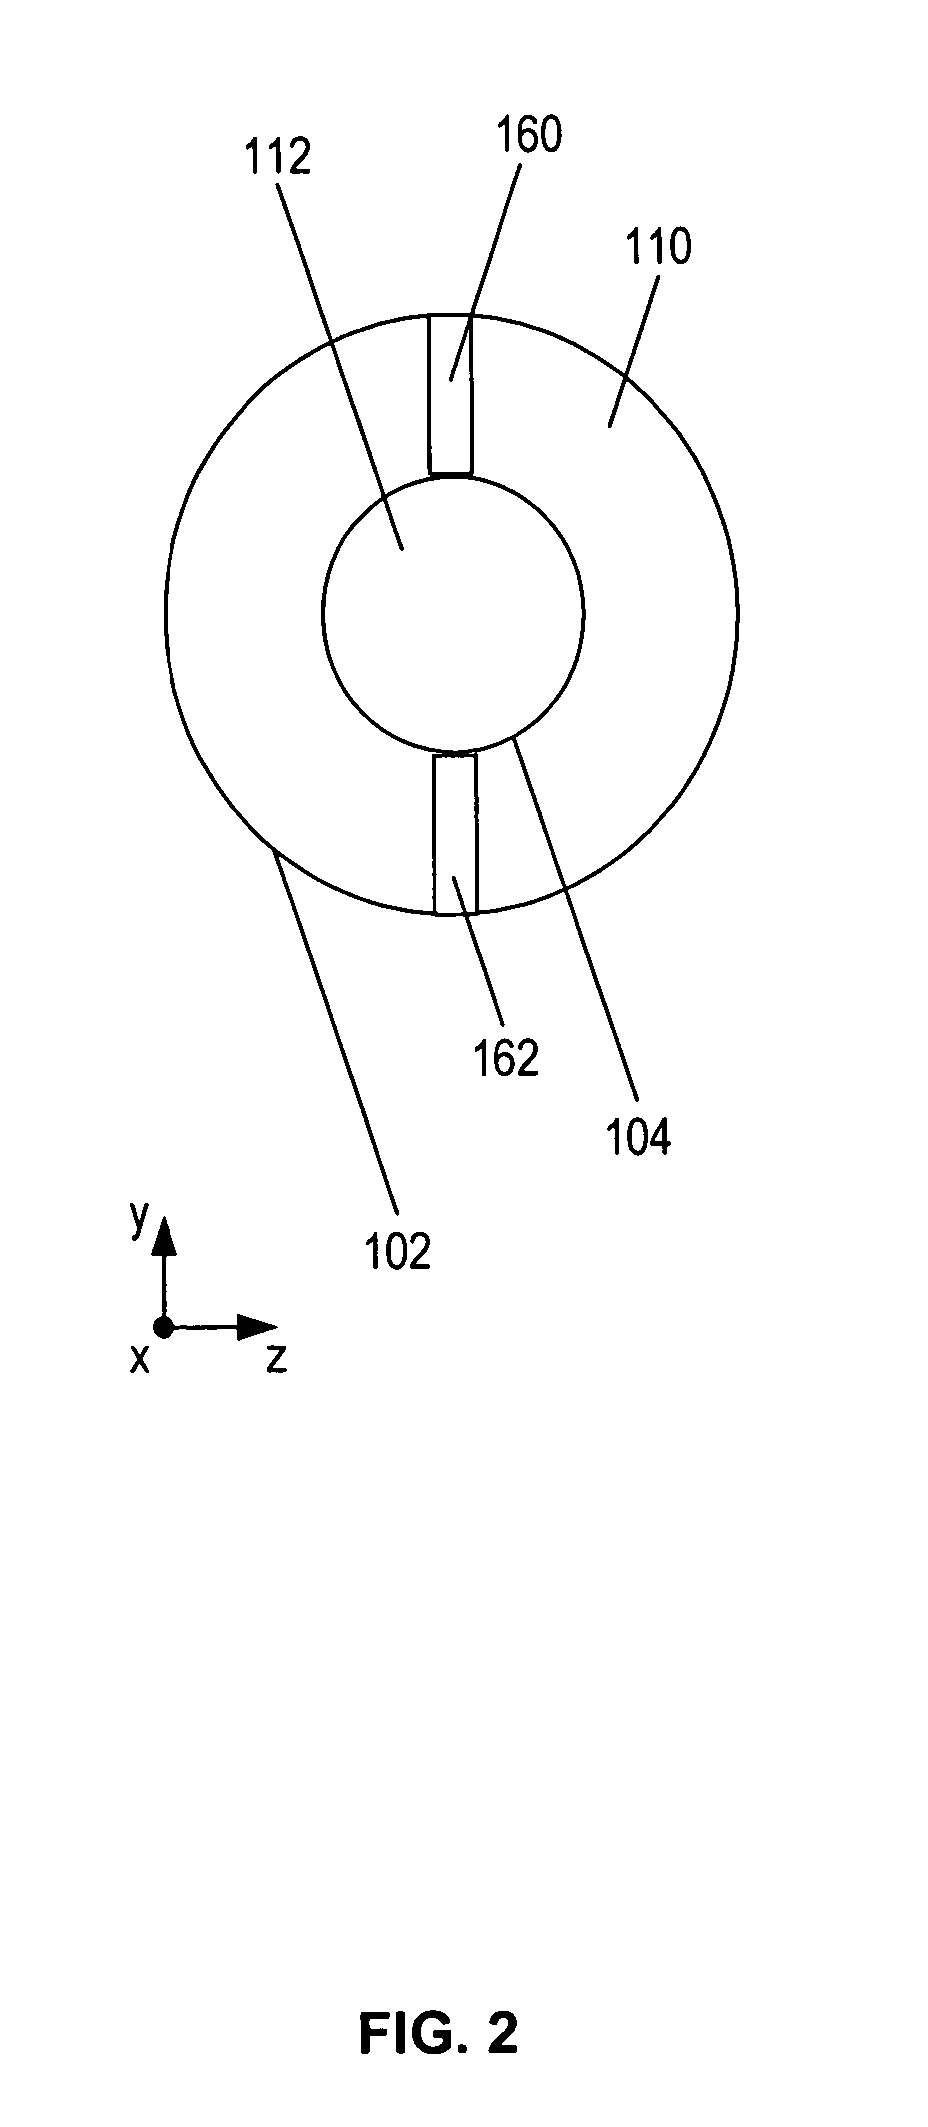 Pulse detonation combustor with folded flow path